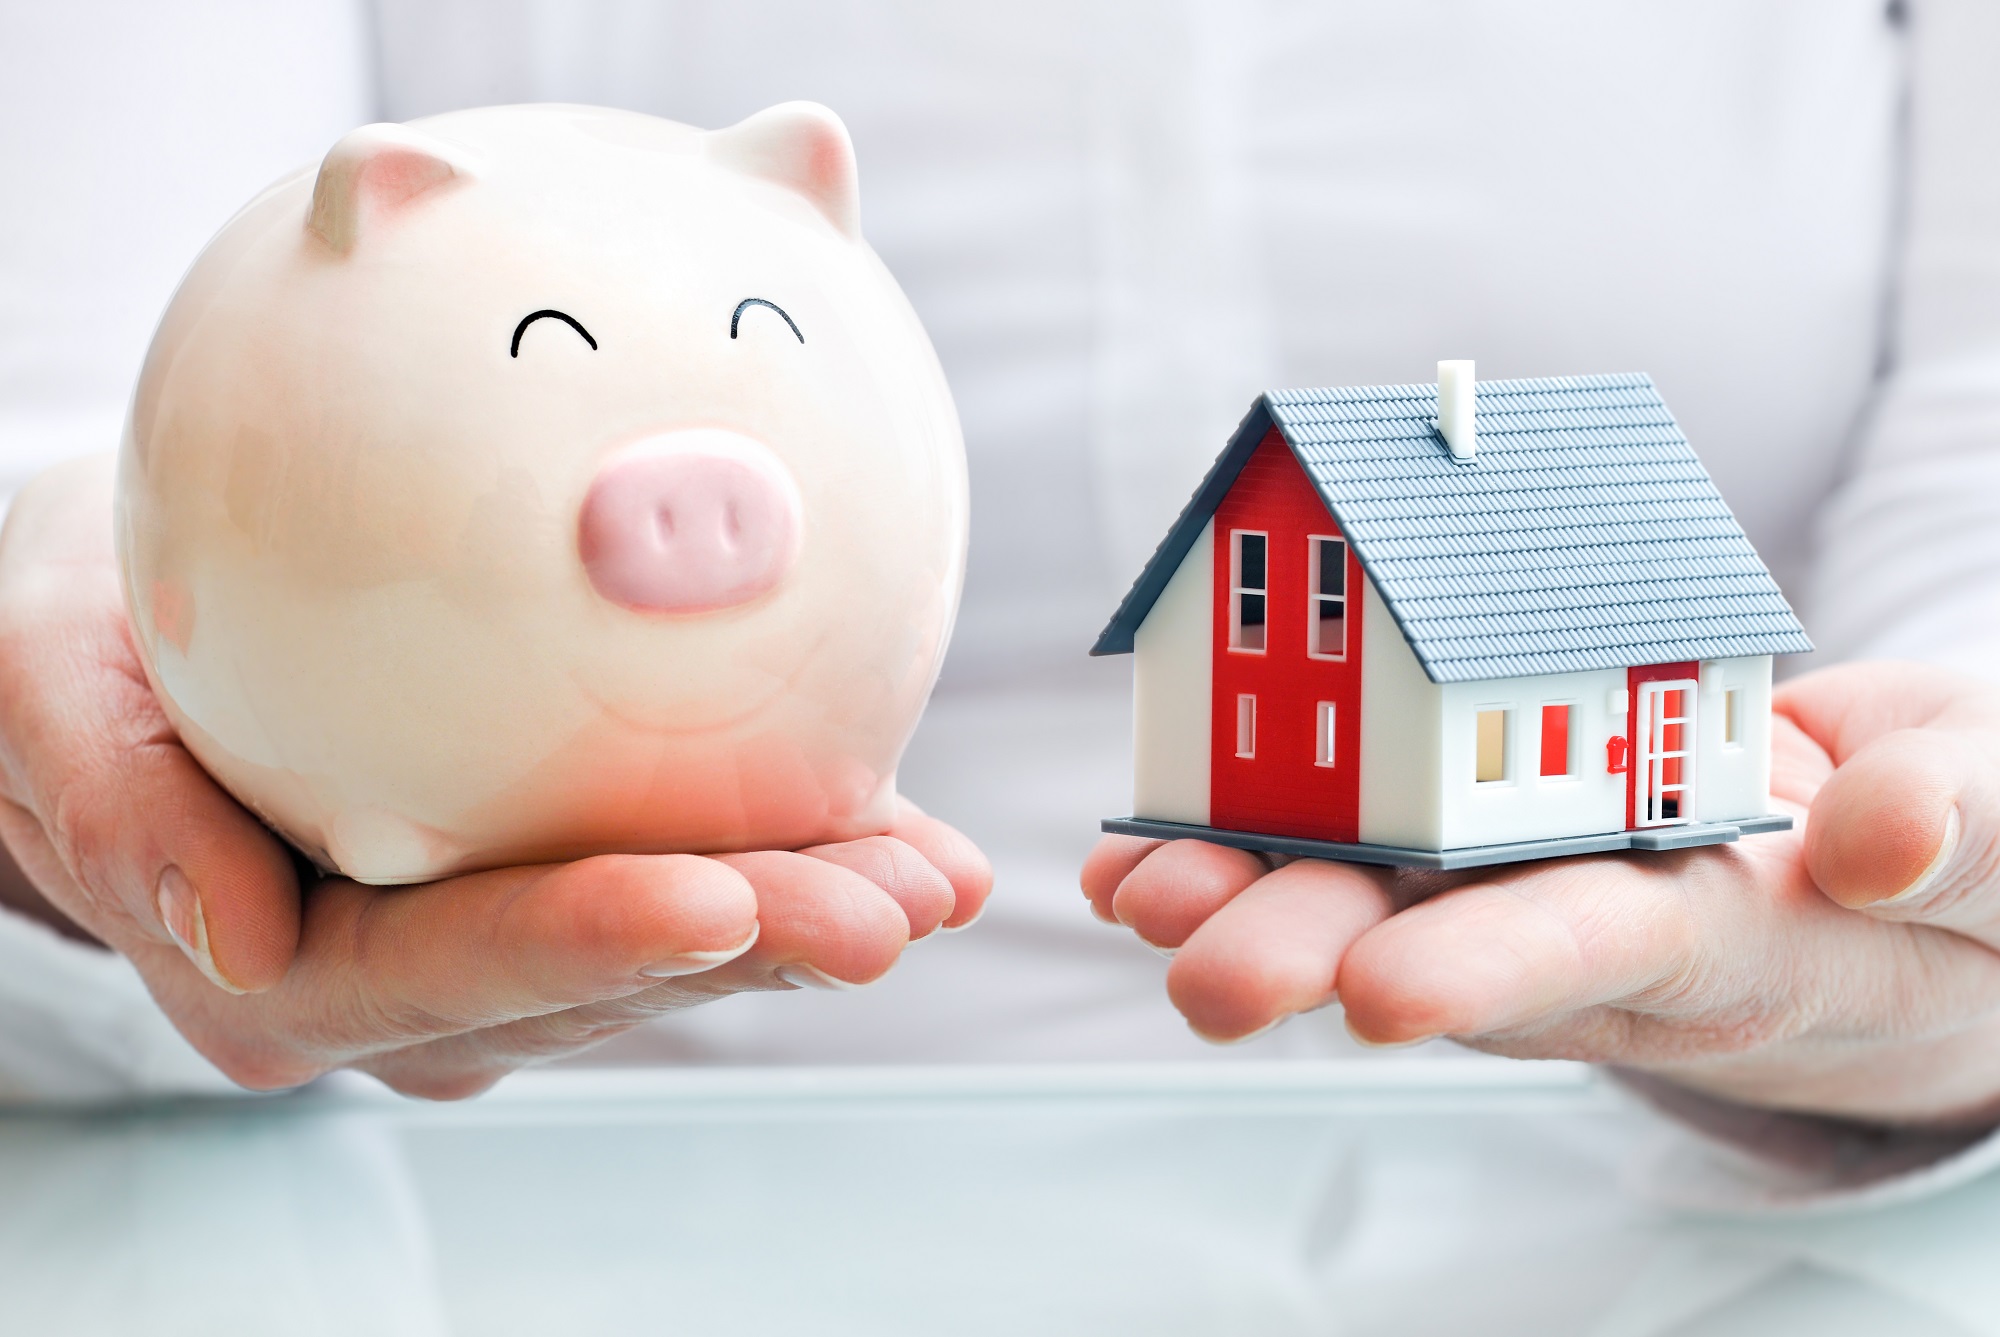 Tips for Saving on Your Home Insurance, Part II